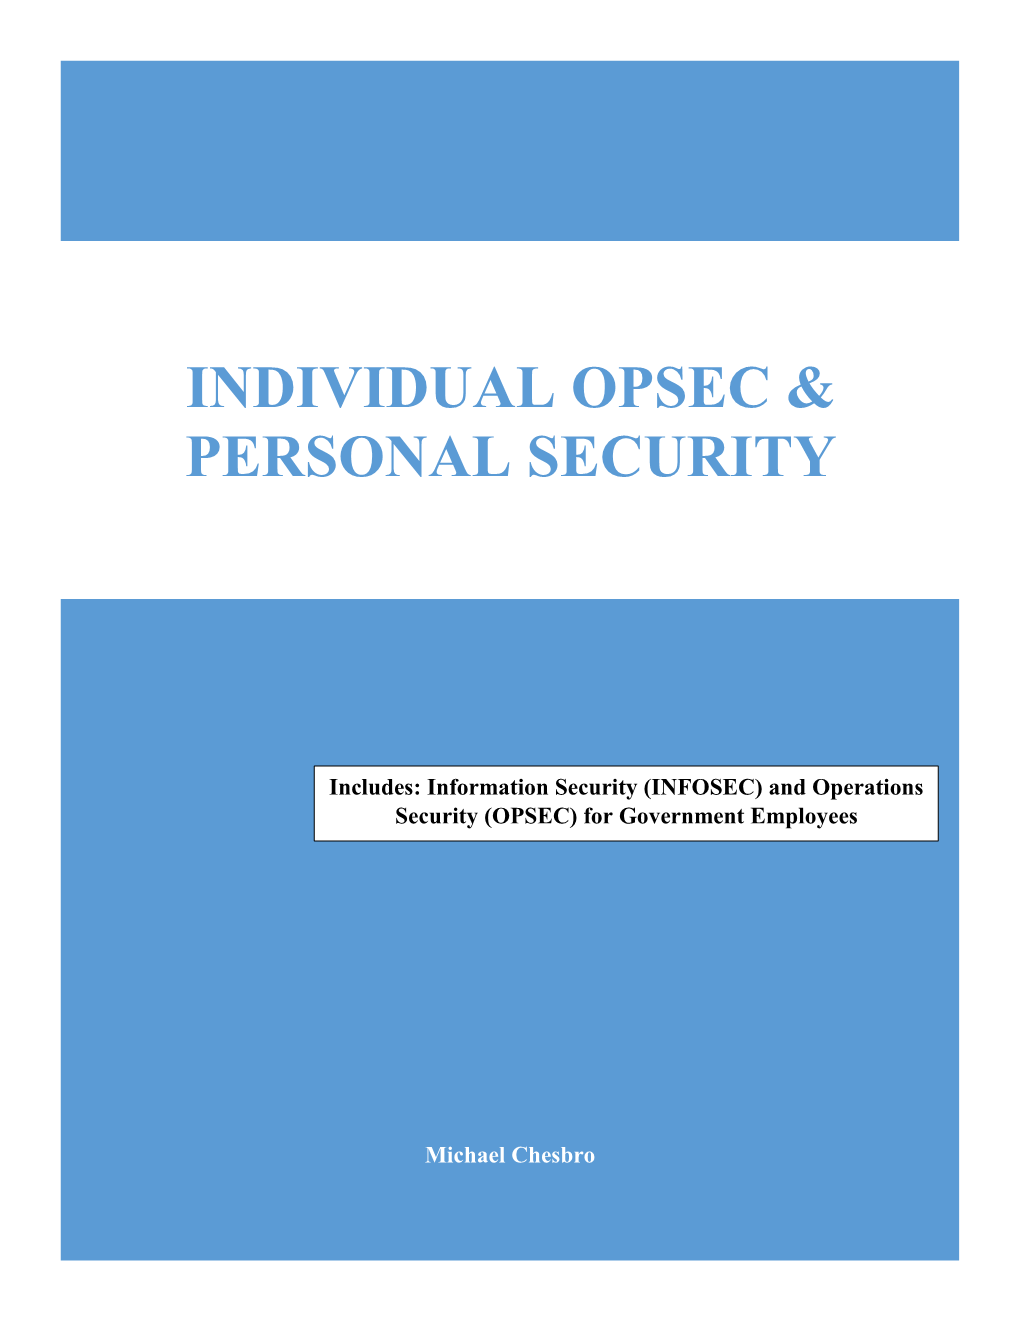 Individual OPSEC & Personal Security